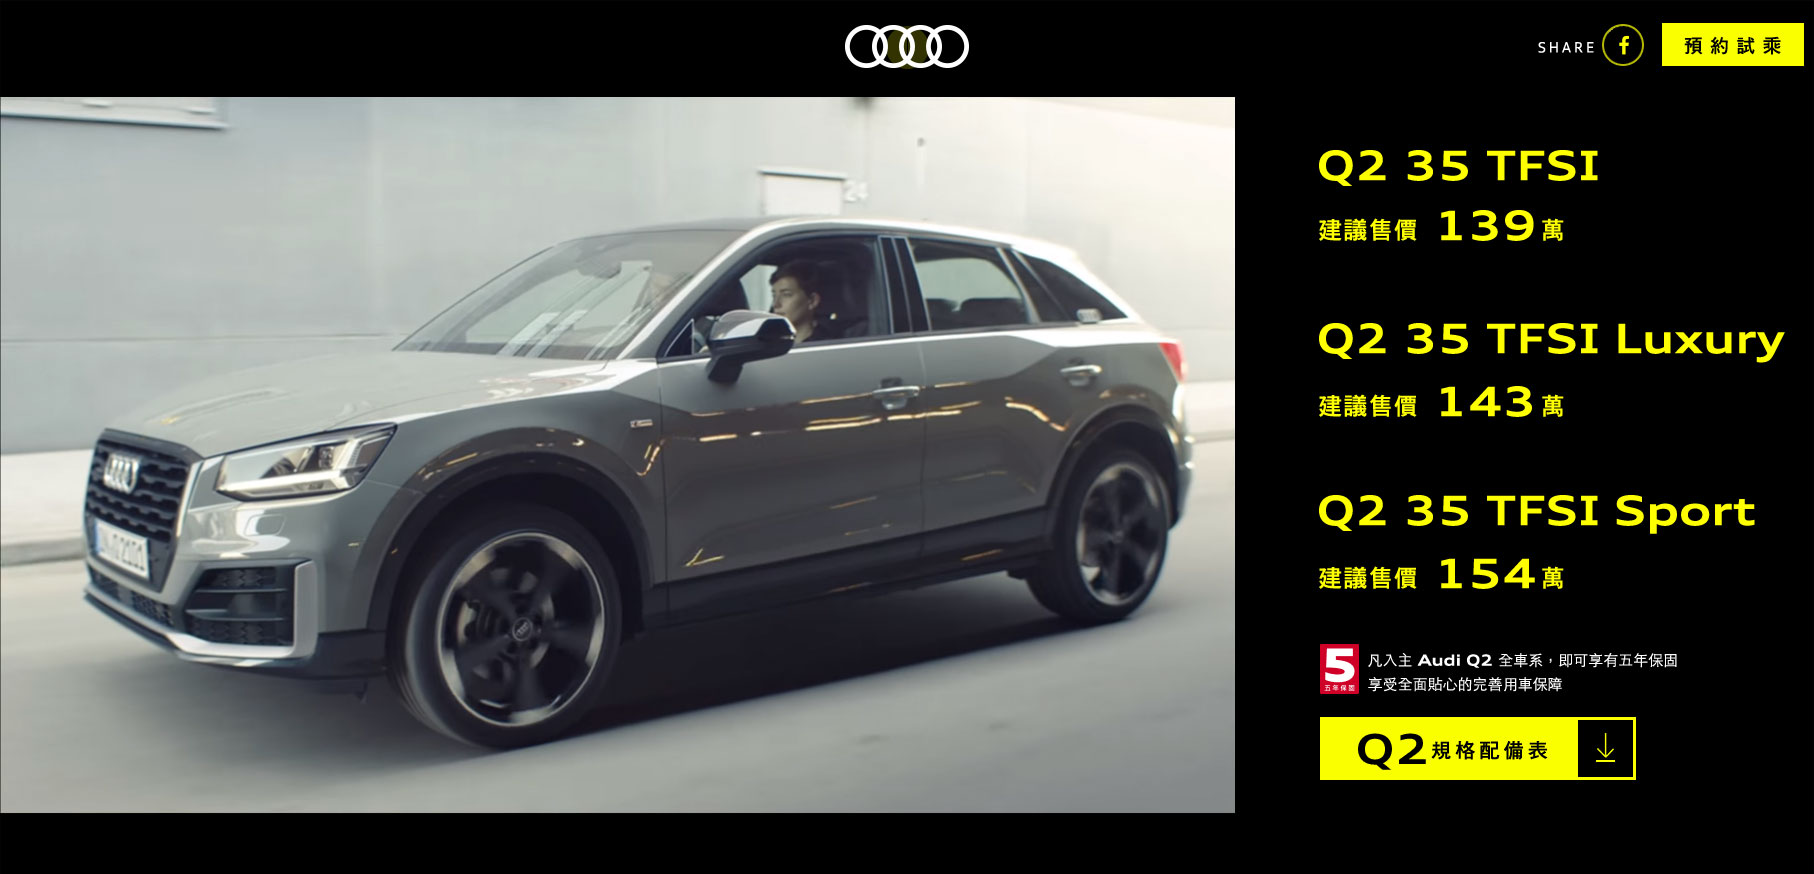 The Audi Q2 - Audi Taiwan - Website of the Day